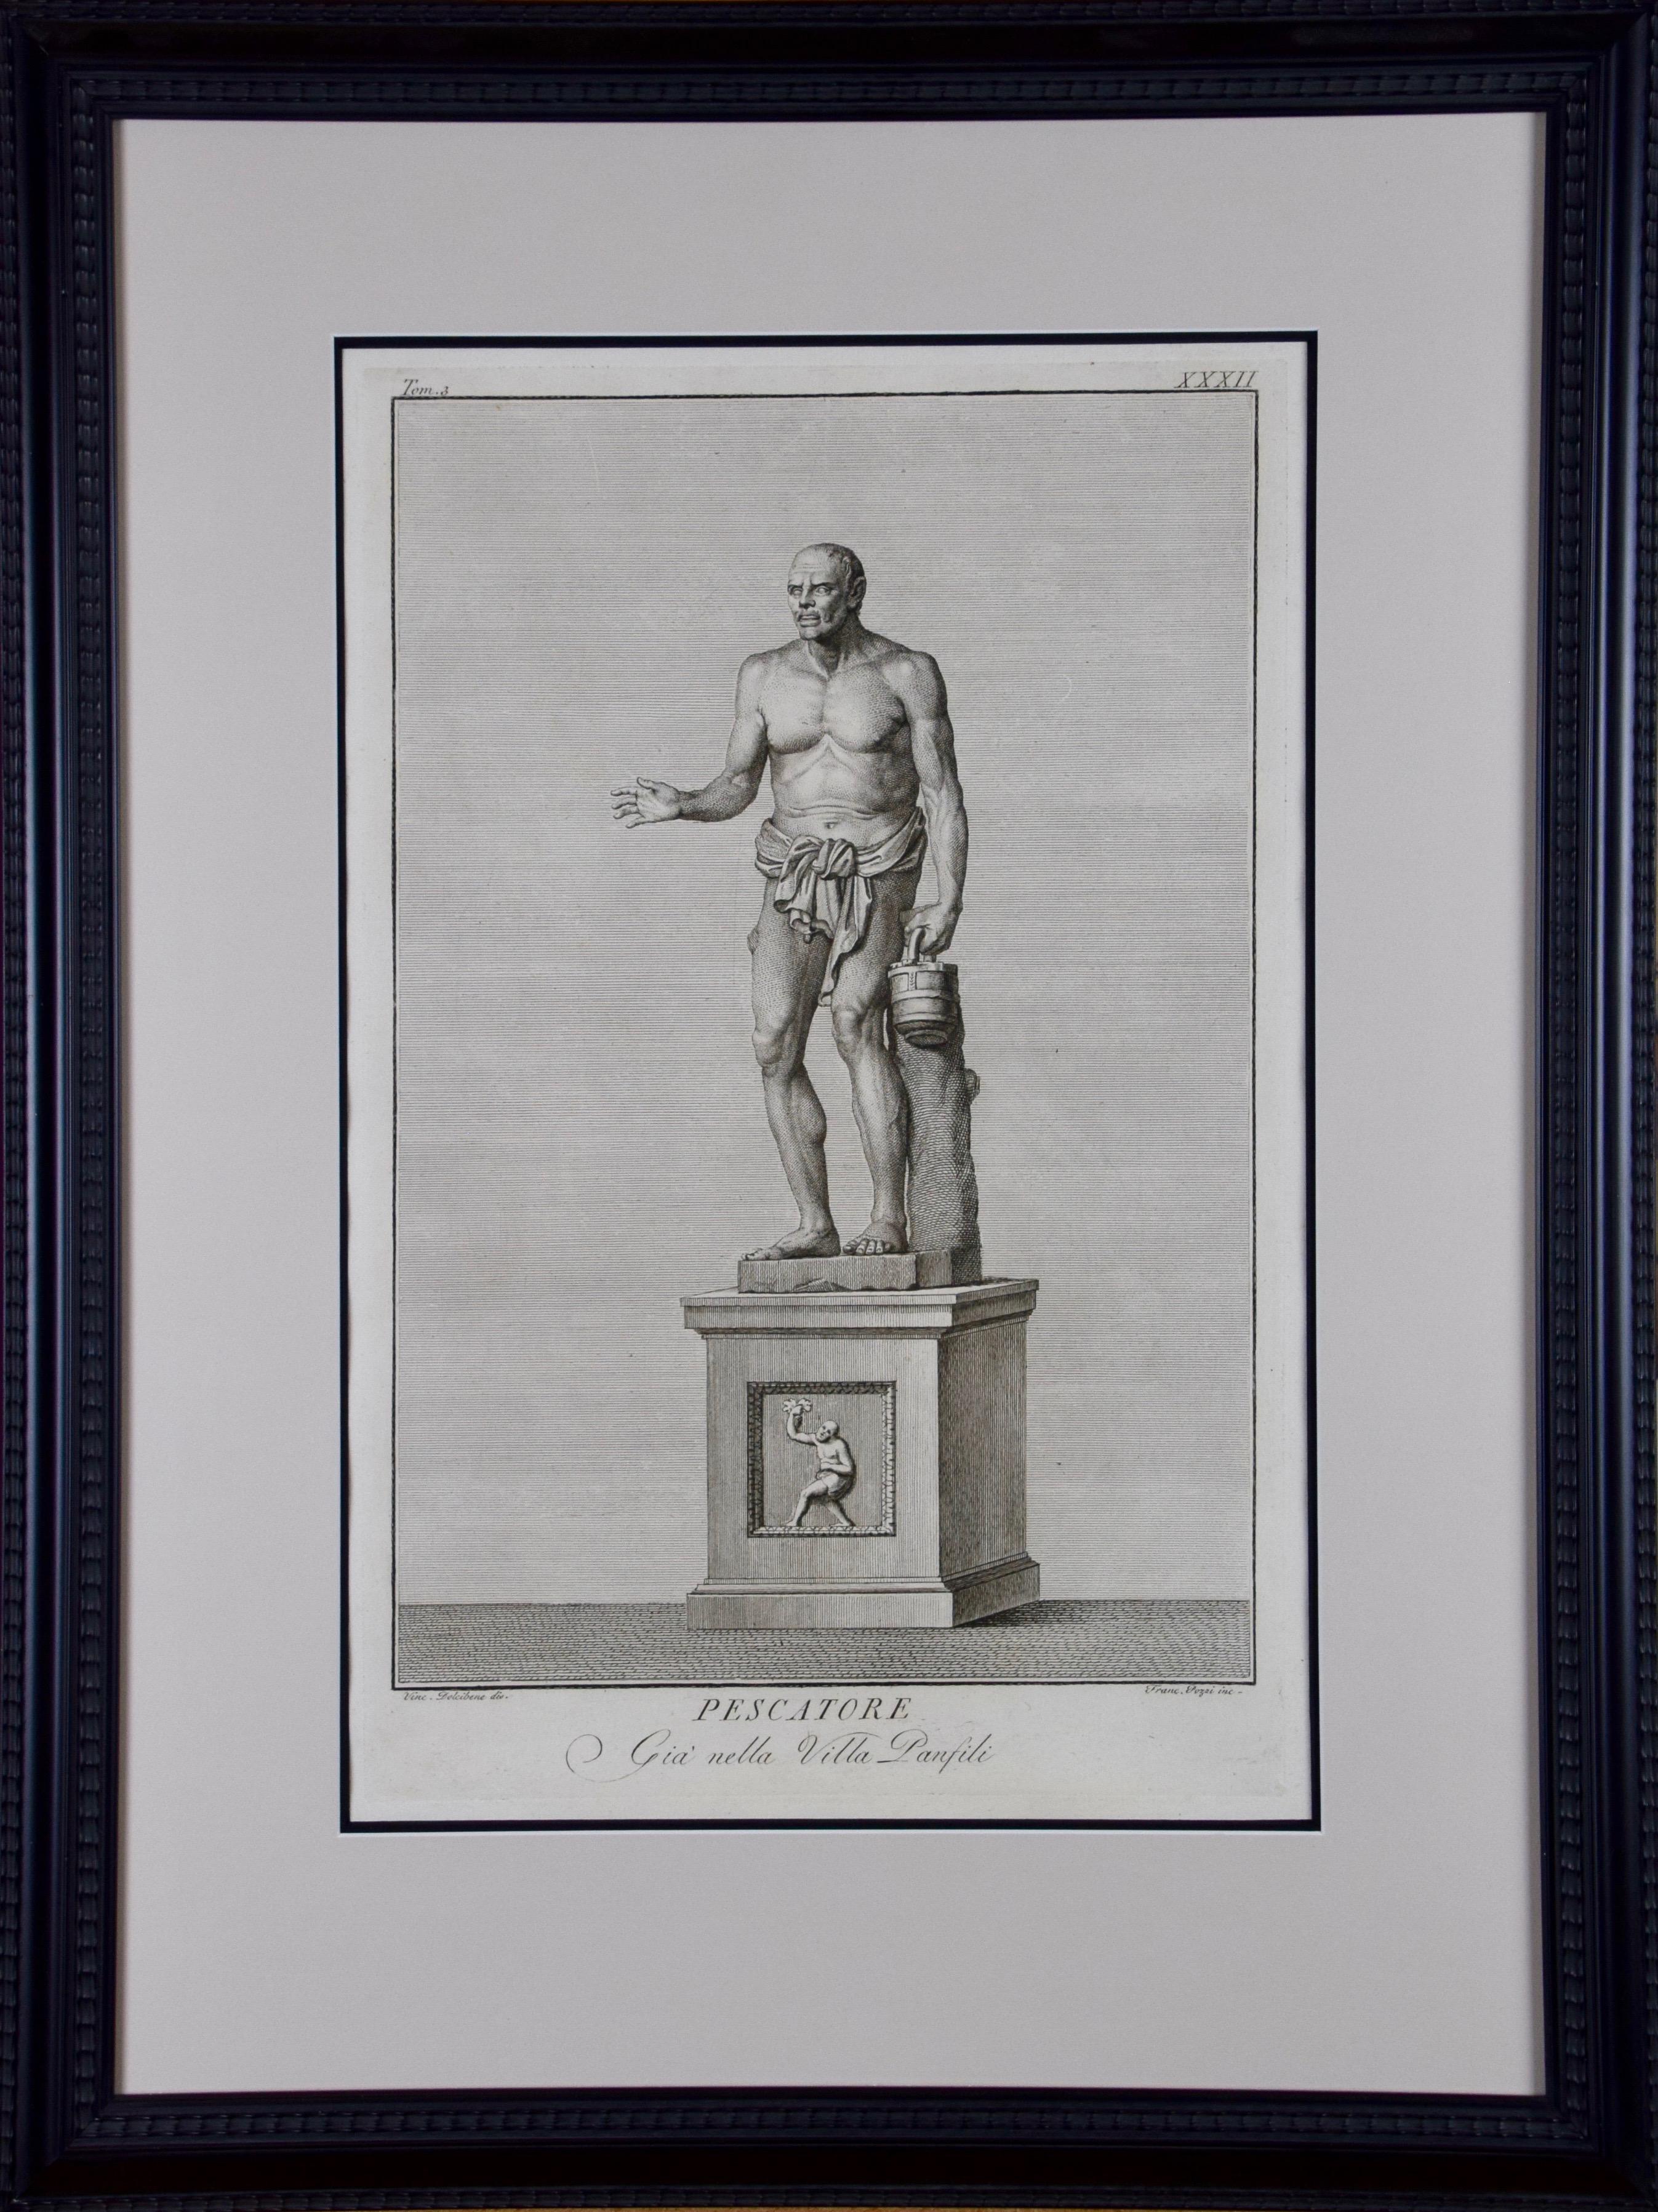 Ancient Roman Statues in the Vatican: A Grouping of Three 18th C. Engravings - Print by Vincenzo Dolcibene